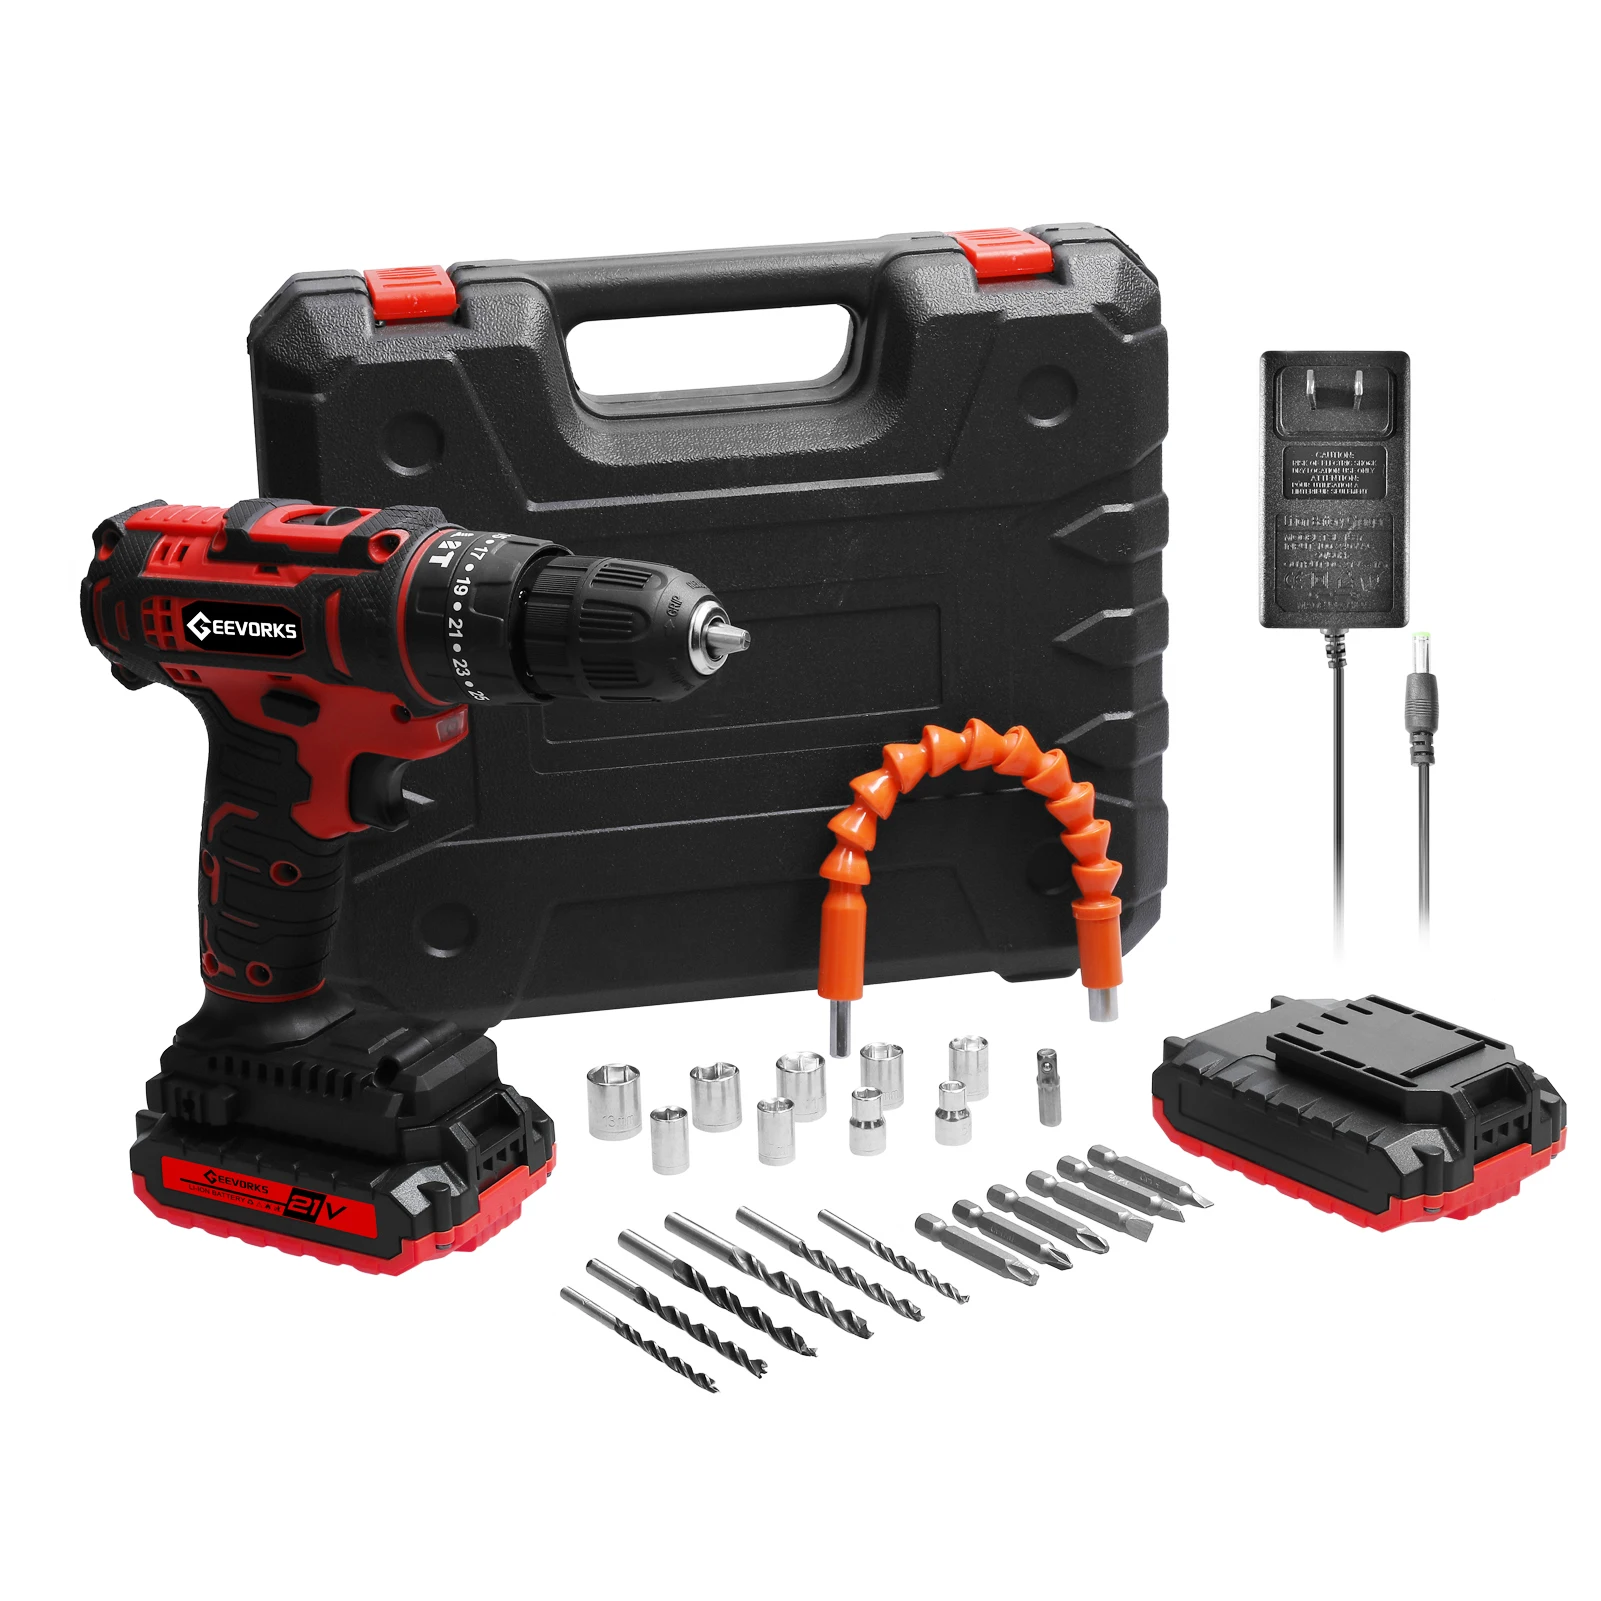 

3in1 Multifuctional 21V Electric DrillStepless Speed Regulation Rotation 25 Gears of Torques Adjustable Lithium Screwdriver